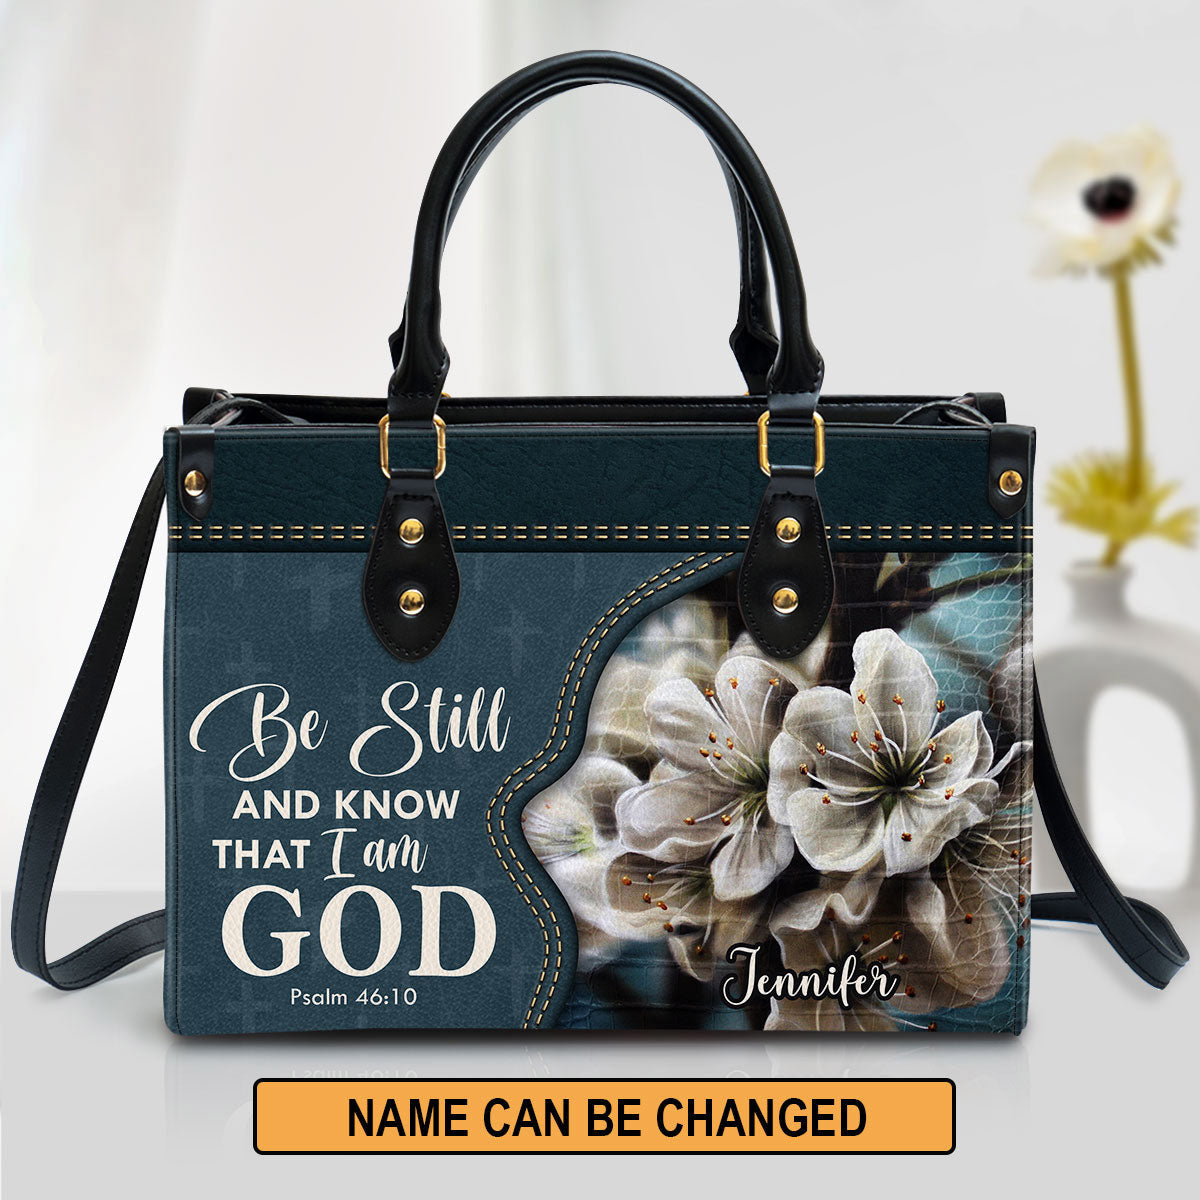 Personalized Leather Bag For Women - Be Still And Know That I Am God Leather Bag Leather Bag - Christian Gifts for Women